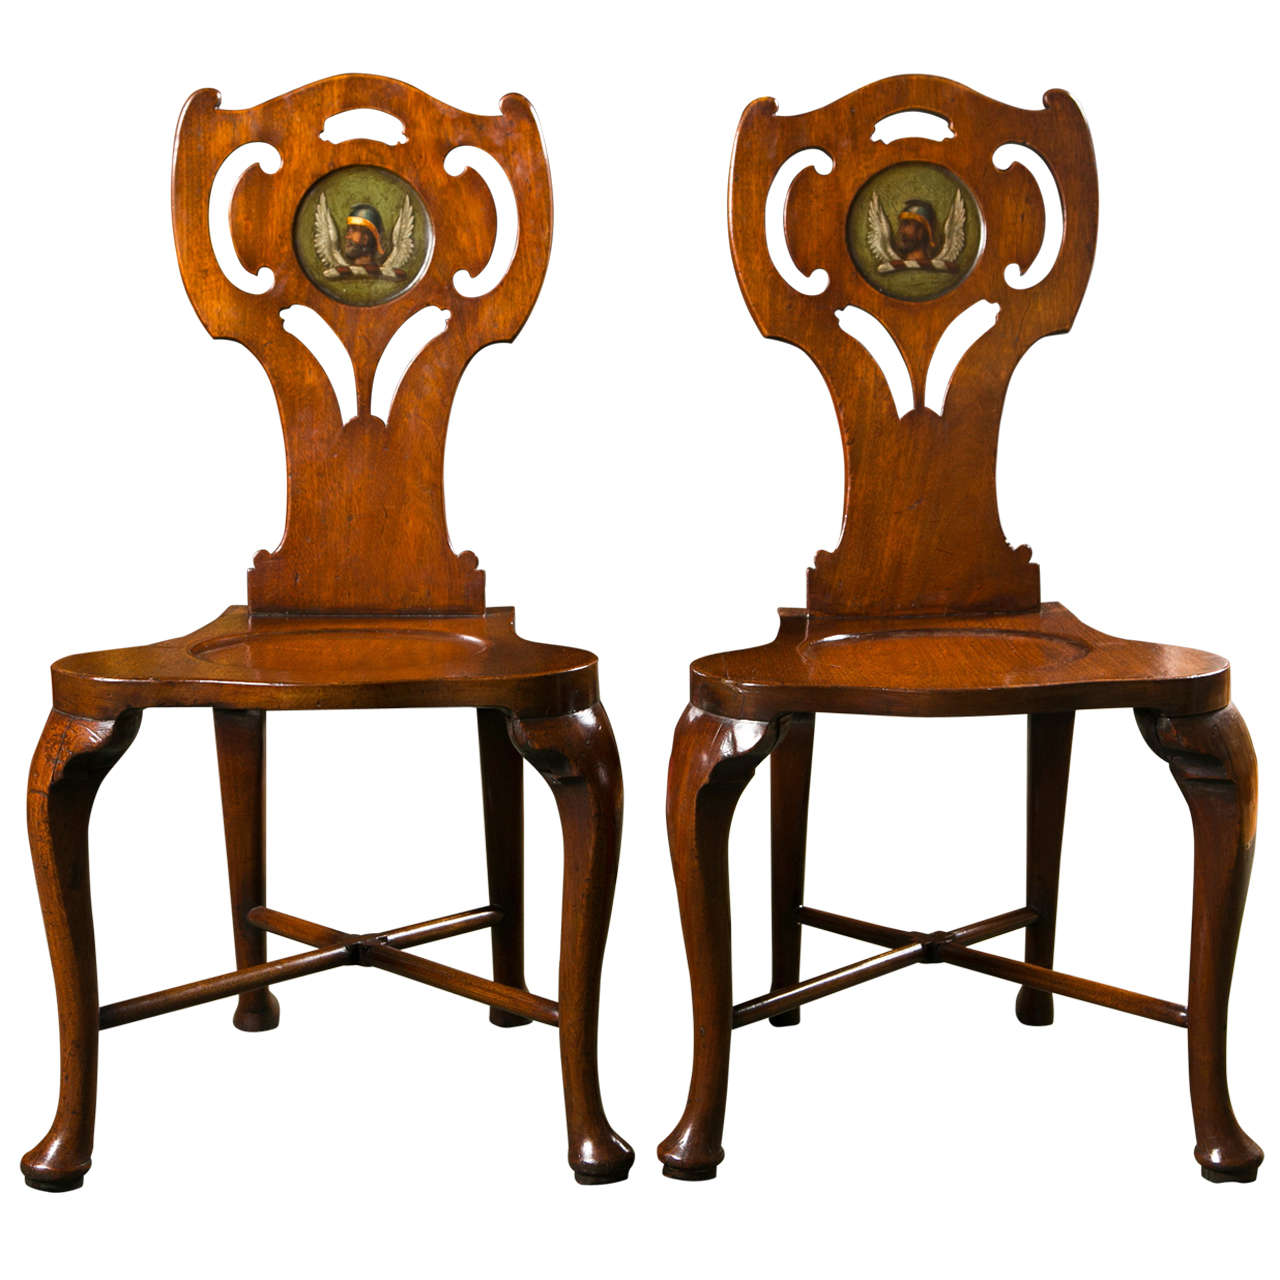  English George III mahogany hall chair with later armorial decoration. From the collection of Ann Landers.